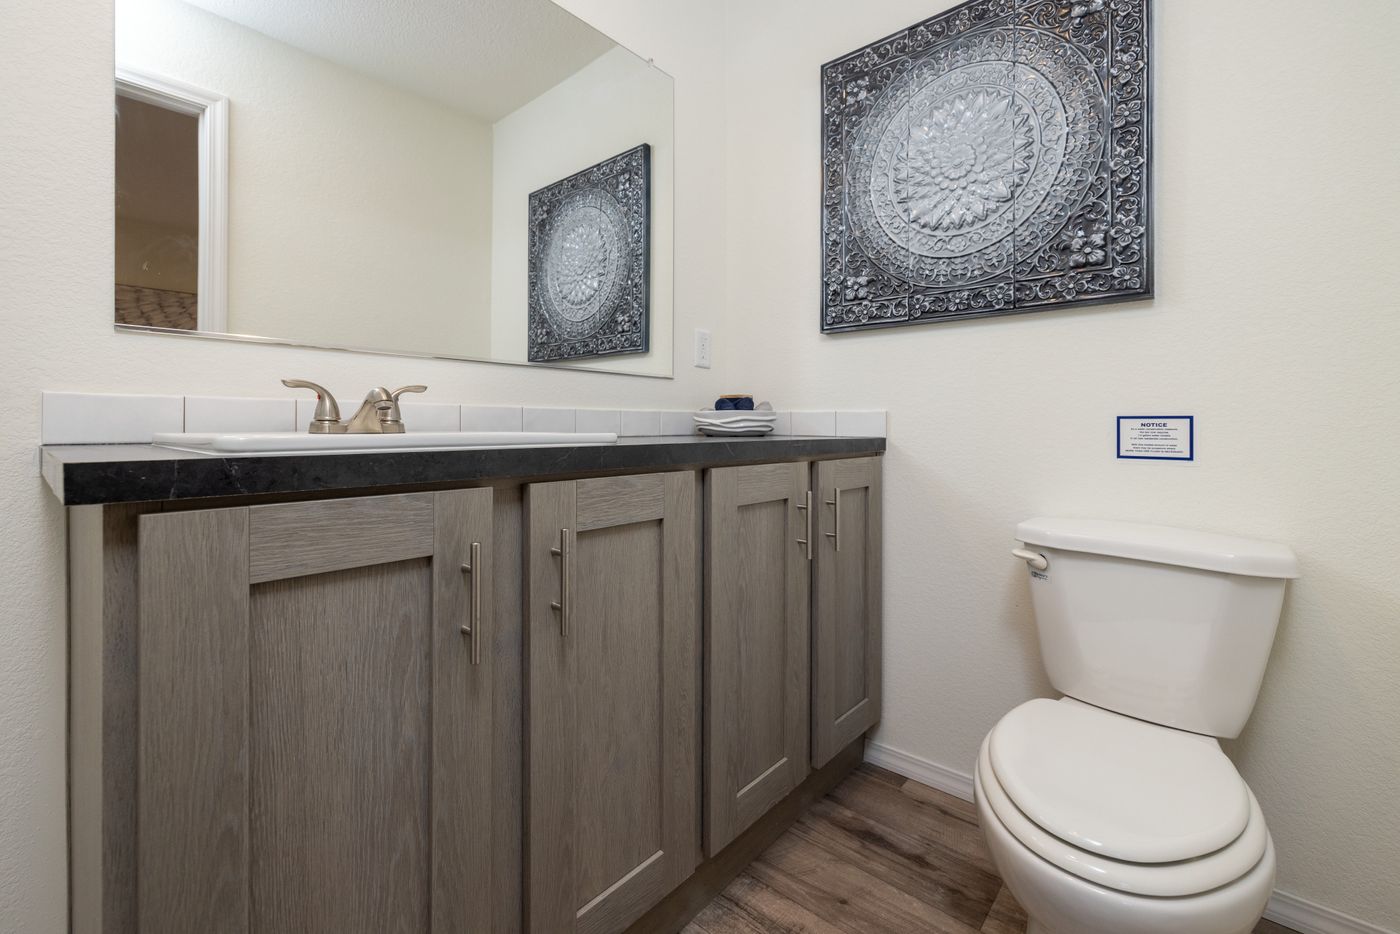 The RAMSEY 217-1 Guest Bathroom. This Manufactured Mobile Home features 3 bedrooms and 2 baths.